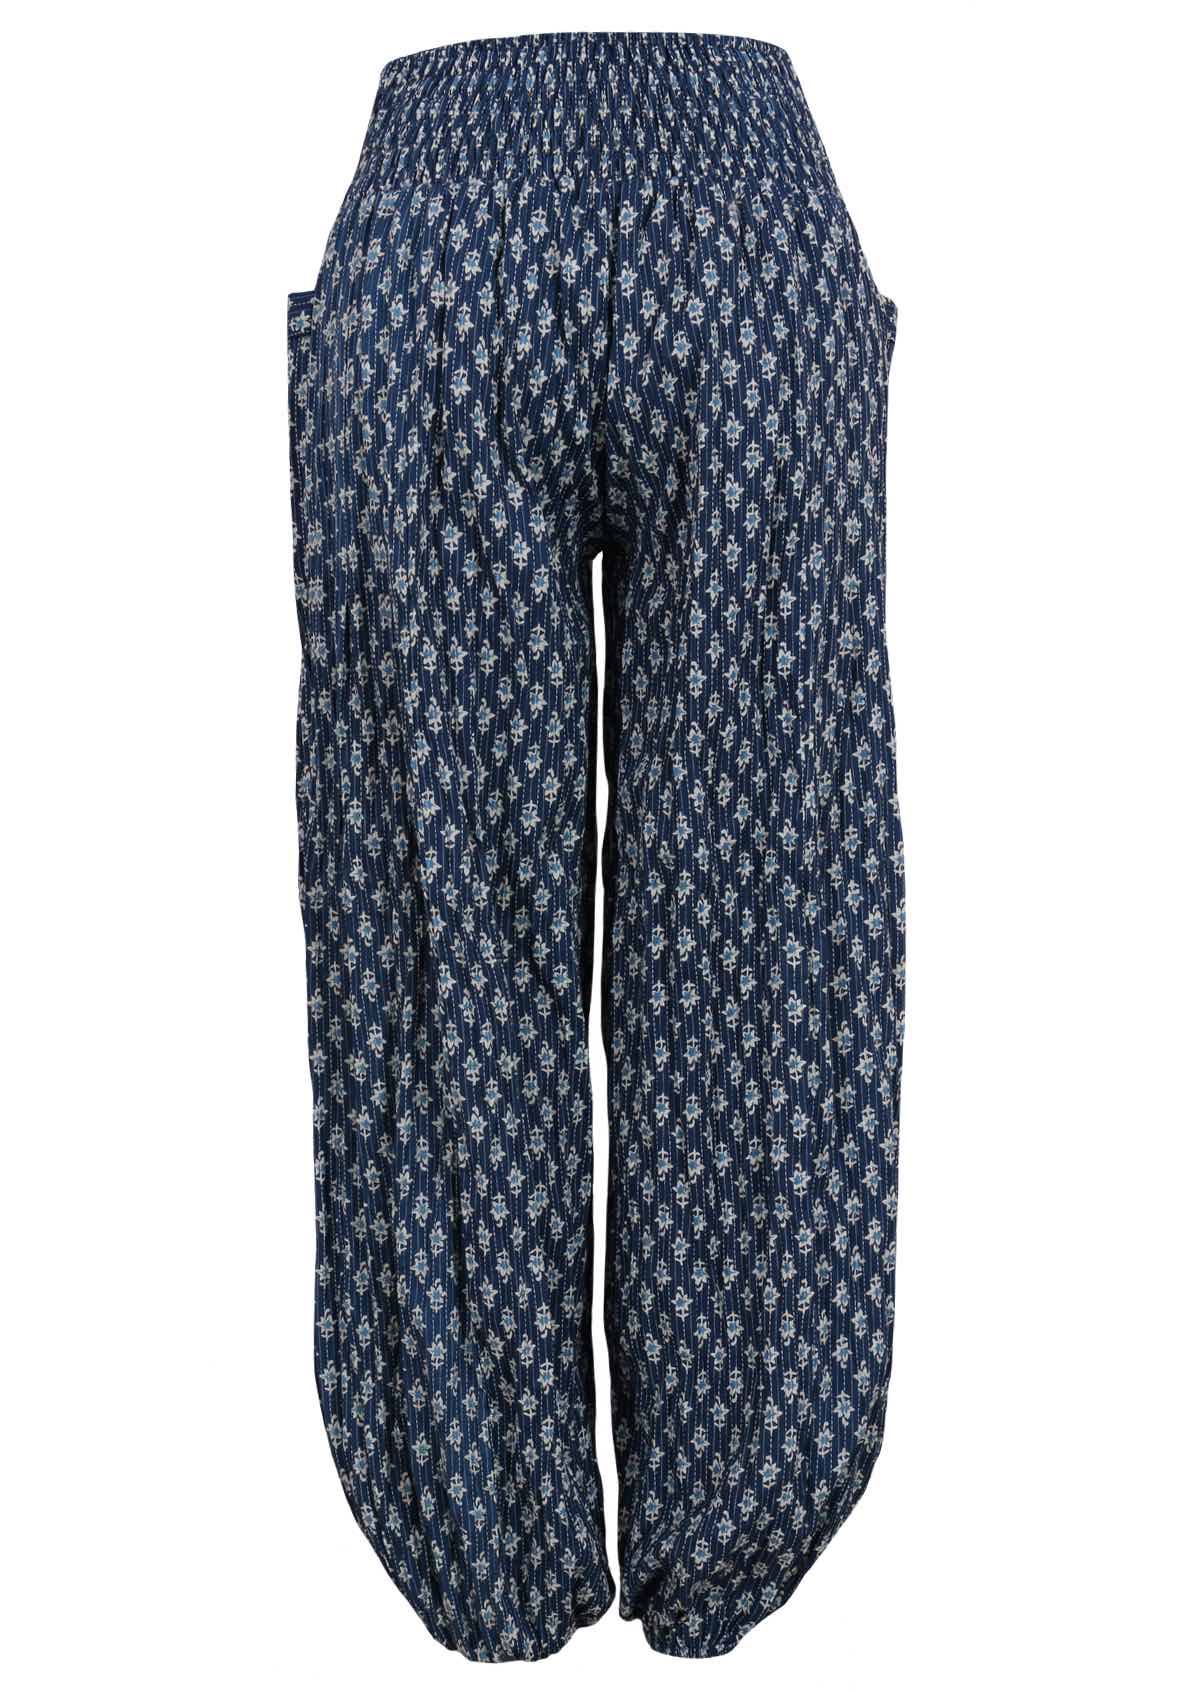 Loose fit cotton pants have kantha stitches for visual interest. 